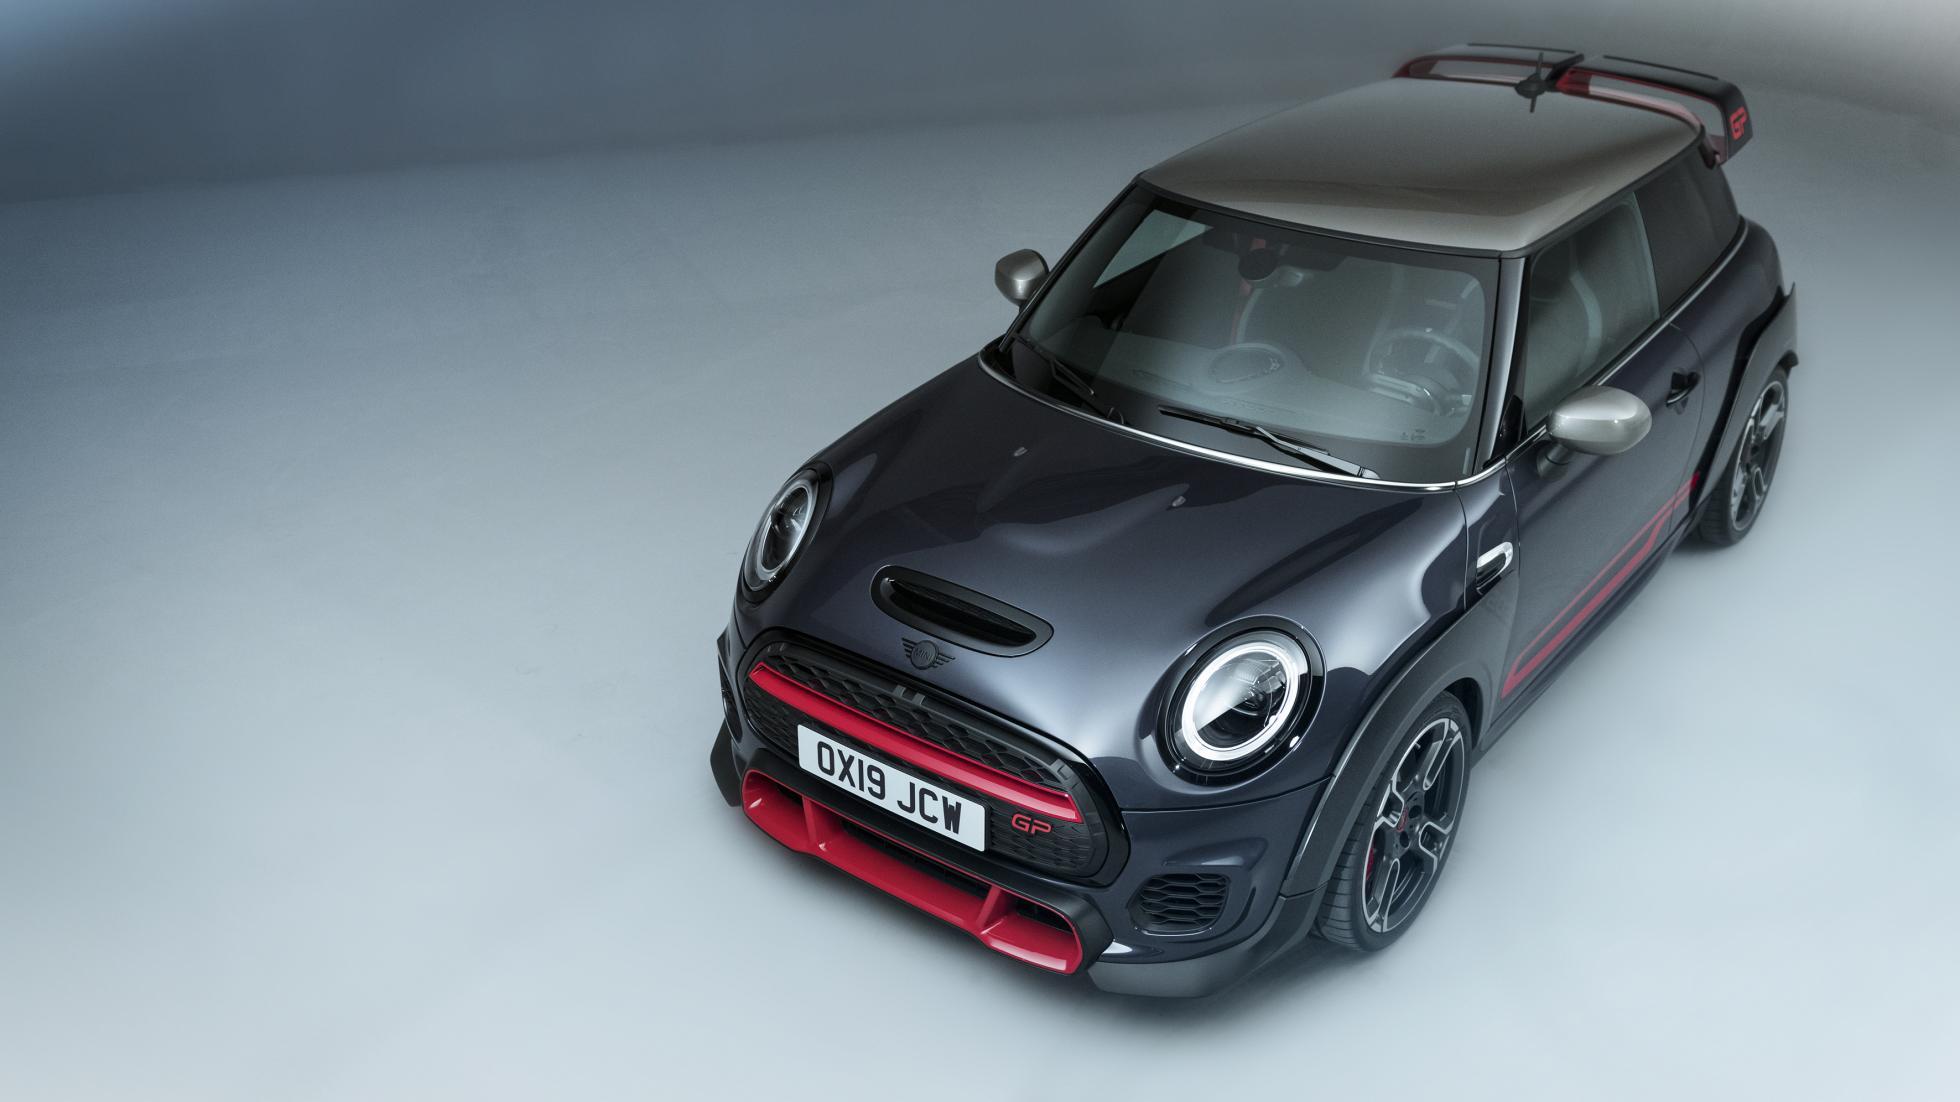 TopGear | The new Mini GP looks as wild as we hoped it would